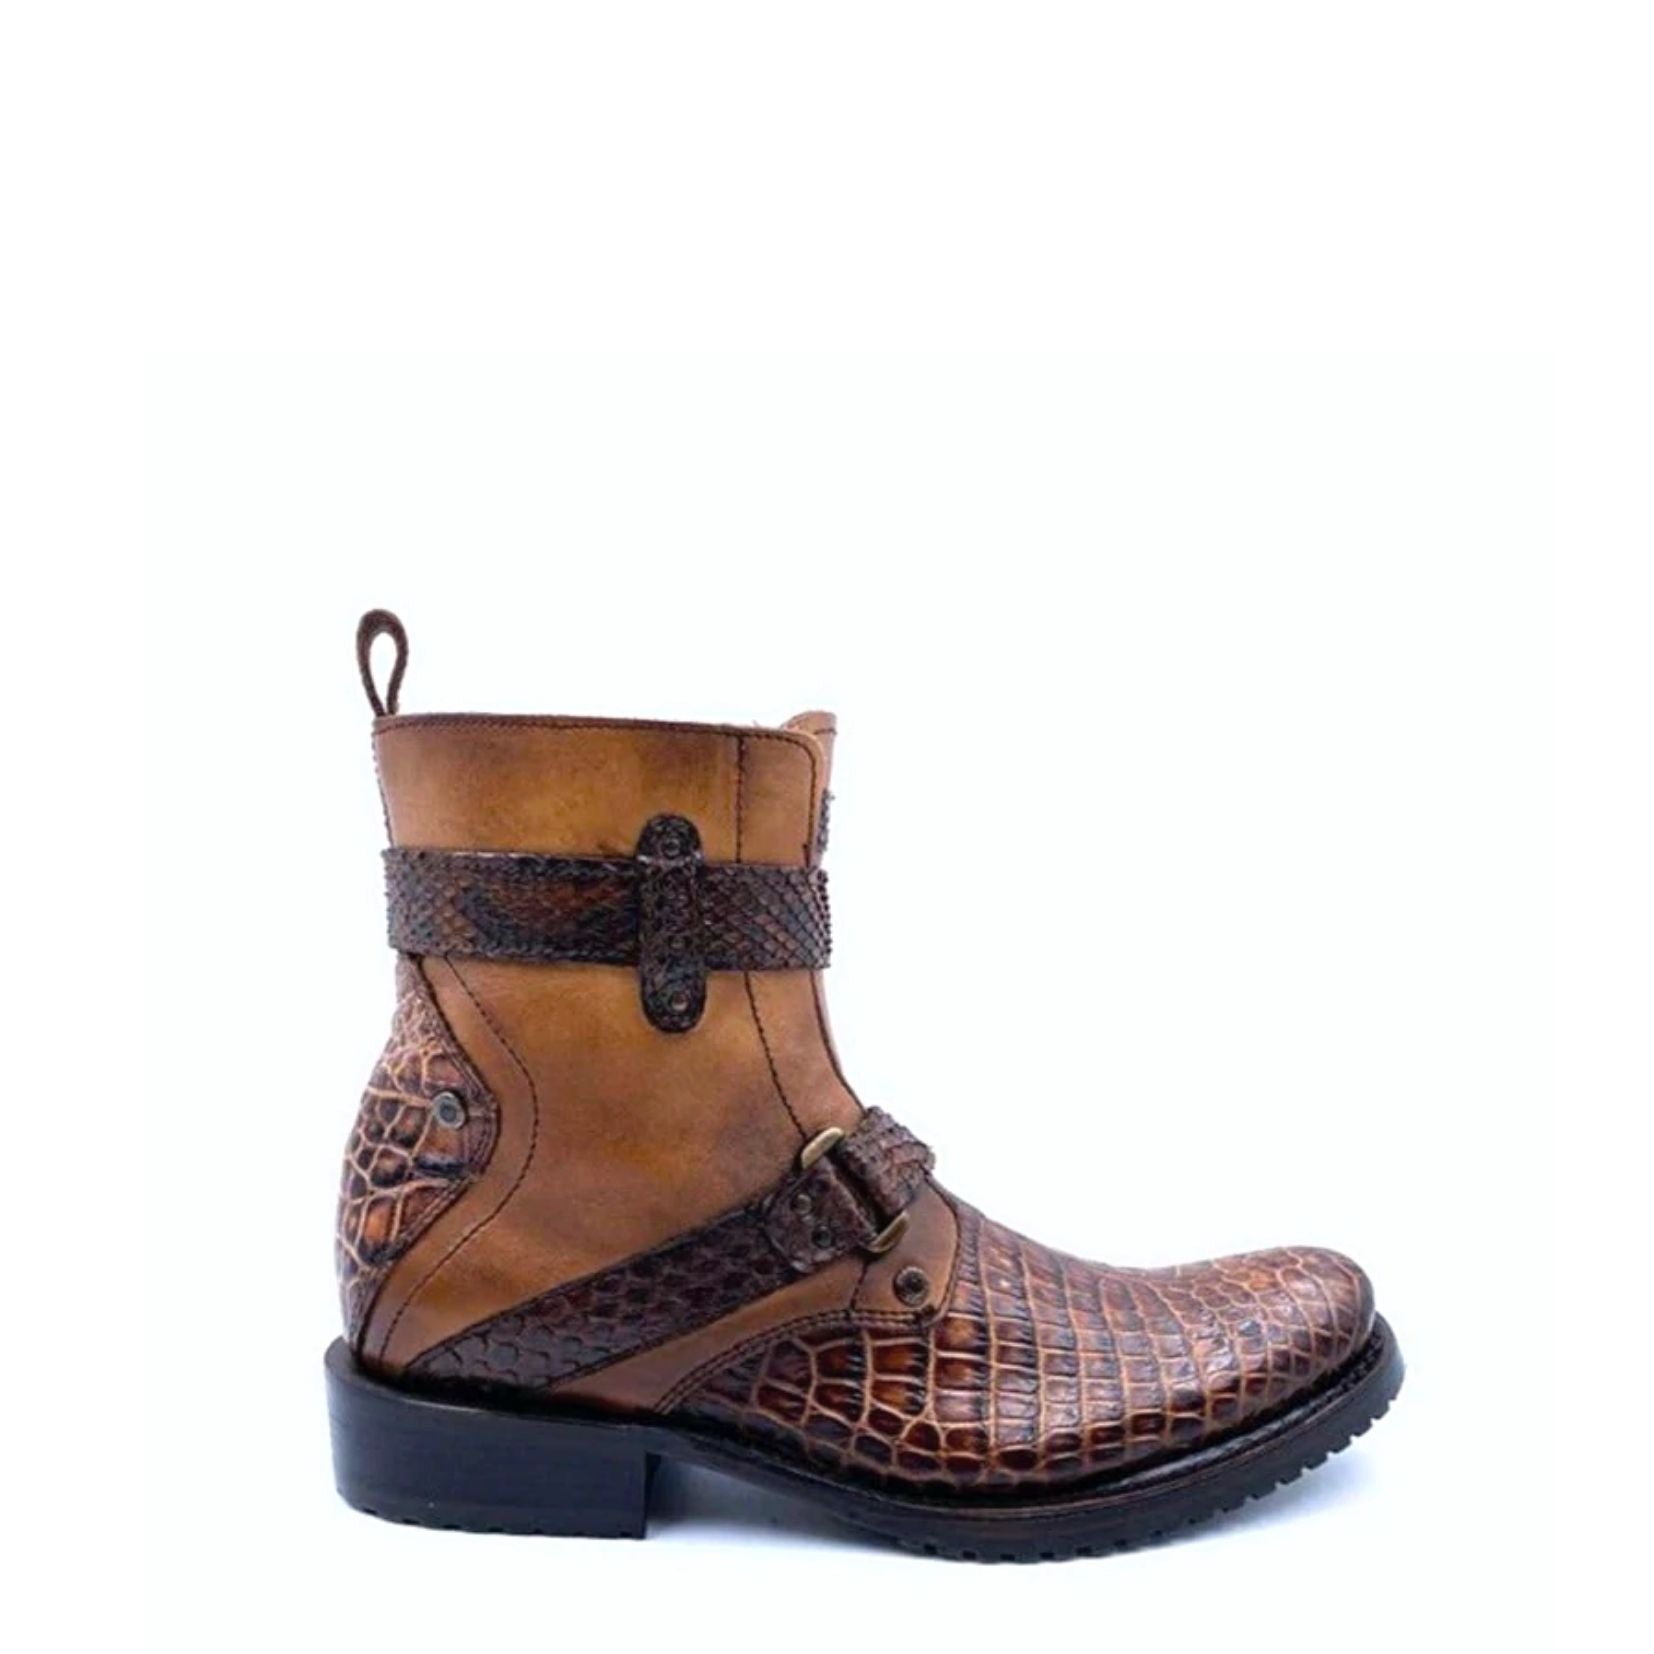 2T13AP - Cuadra brown casual cowboy alligator leather zip ankle boots for men-Kuet.us